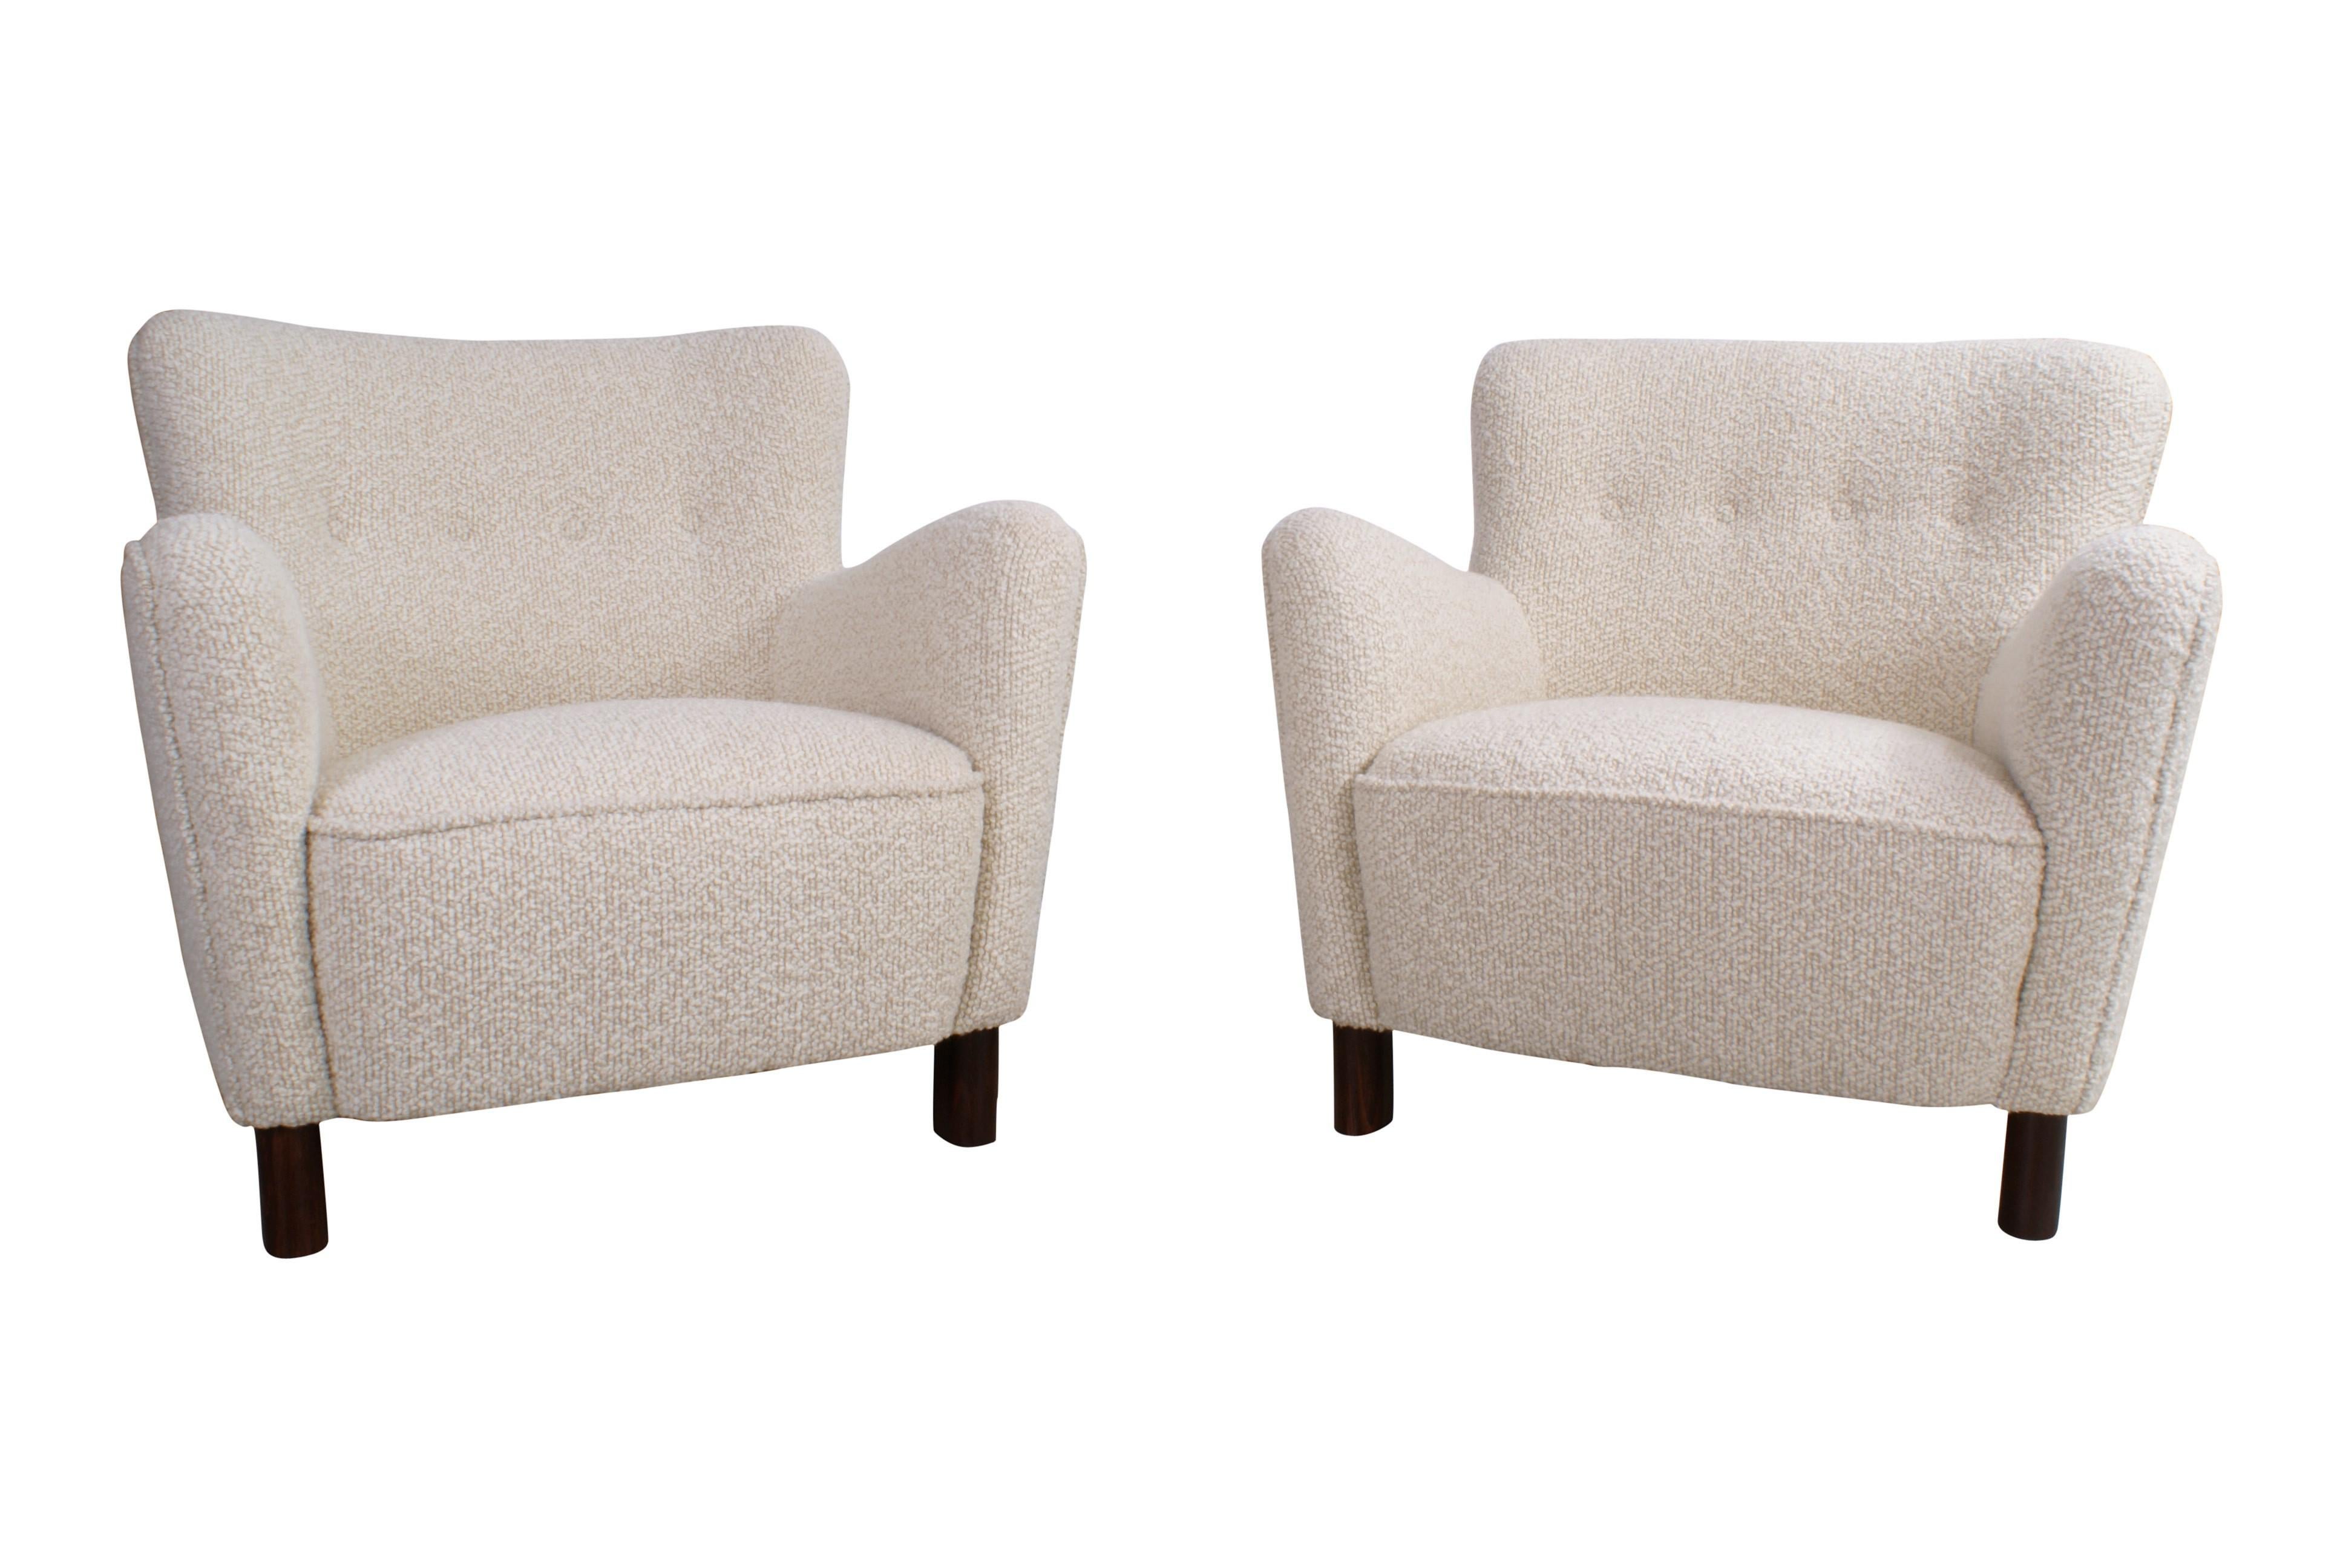 Pair of Fritz Hansen easy chairs, model 1669, circa 1930s. Sculptural chairs re-upholstered in wool, legs of stained beech. All reupholstery work carried out with filling in organic materials and bottom finish with nails.

Price is for the pair of